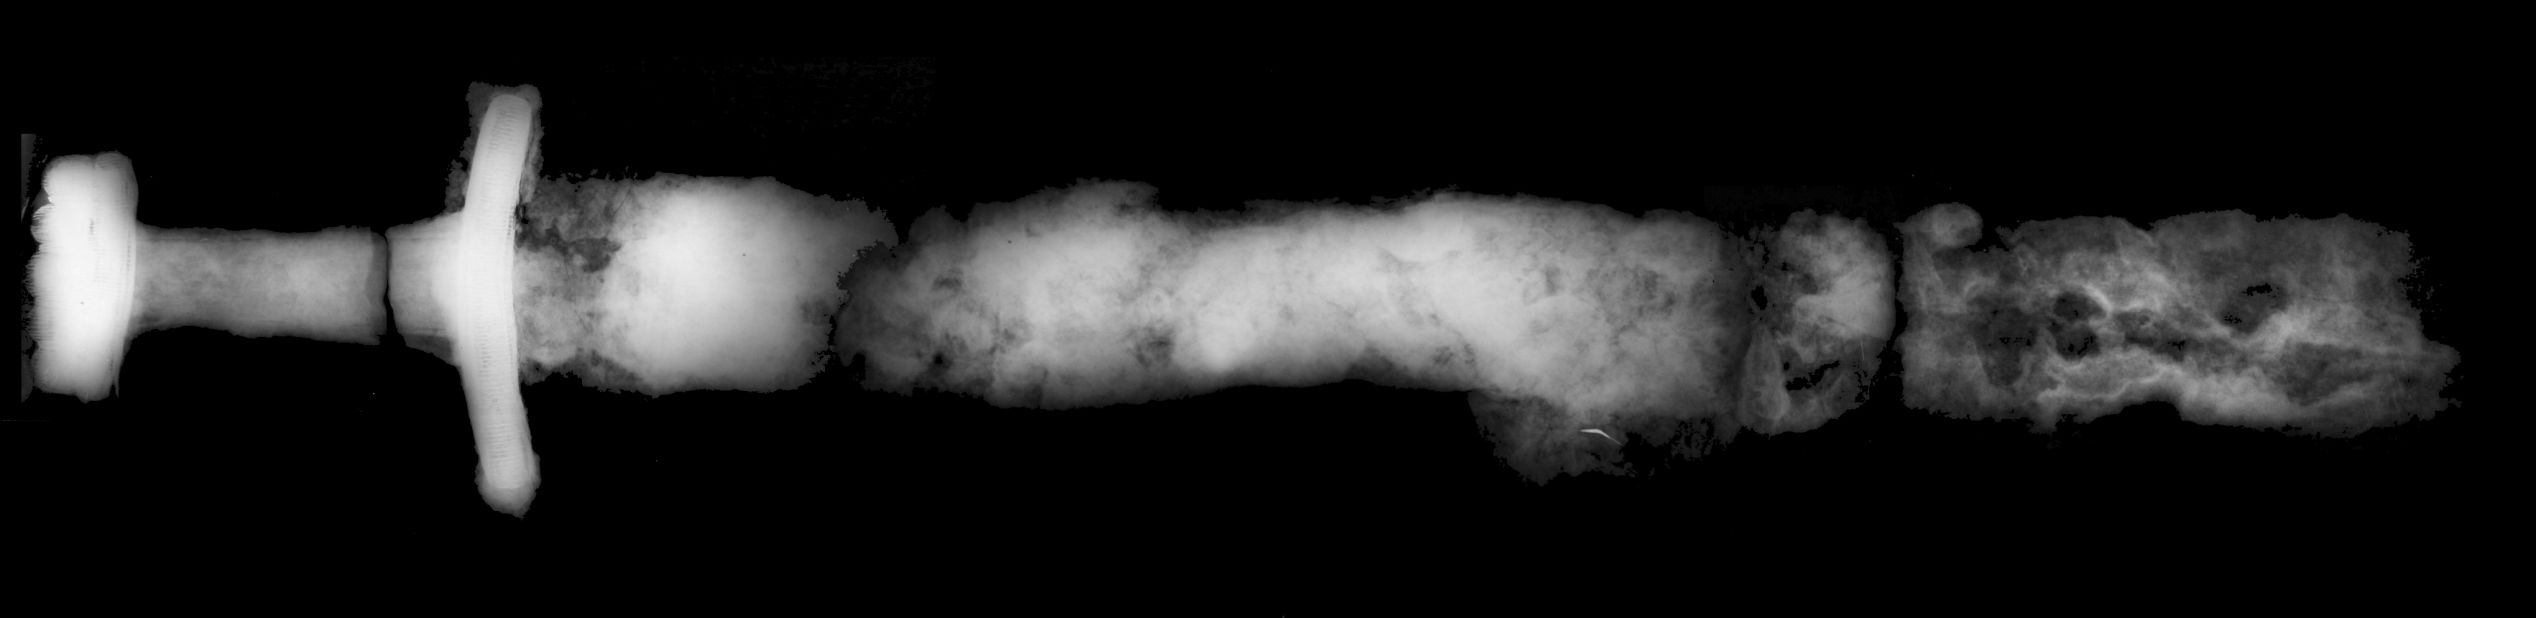 The man was buried with his shield and an ax, and his sword -- seen here in an x-ray image.